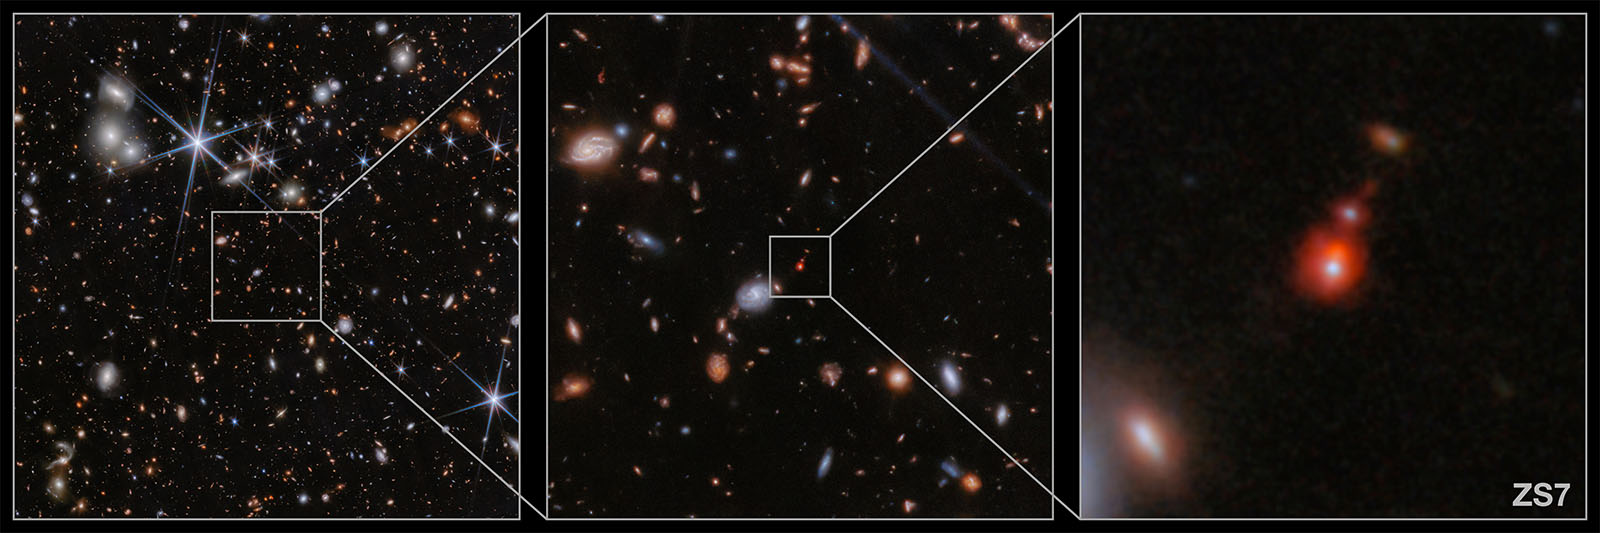 A composite image of deep space showing three zoom levels of galaxy ZS7. The left panel is a wide shot of numerous galaxies, the middle panel zooms in closer on a section, and the right panel shows a close-up of the distant red galaxy ZS7.